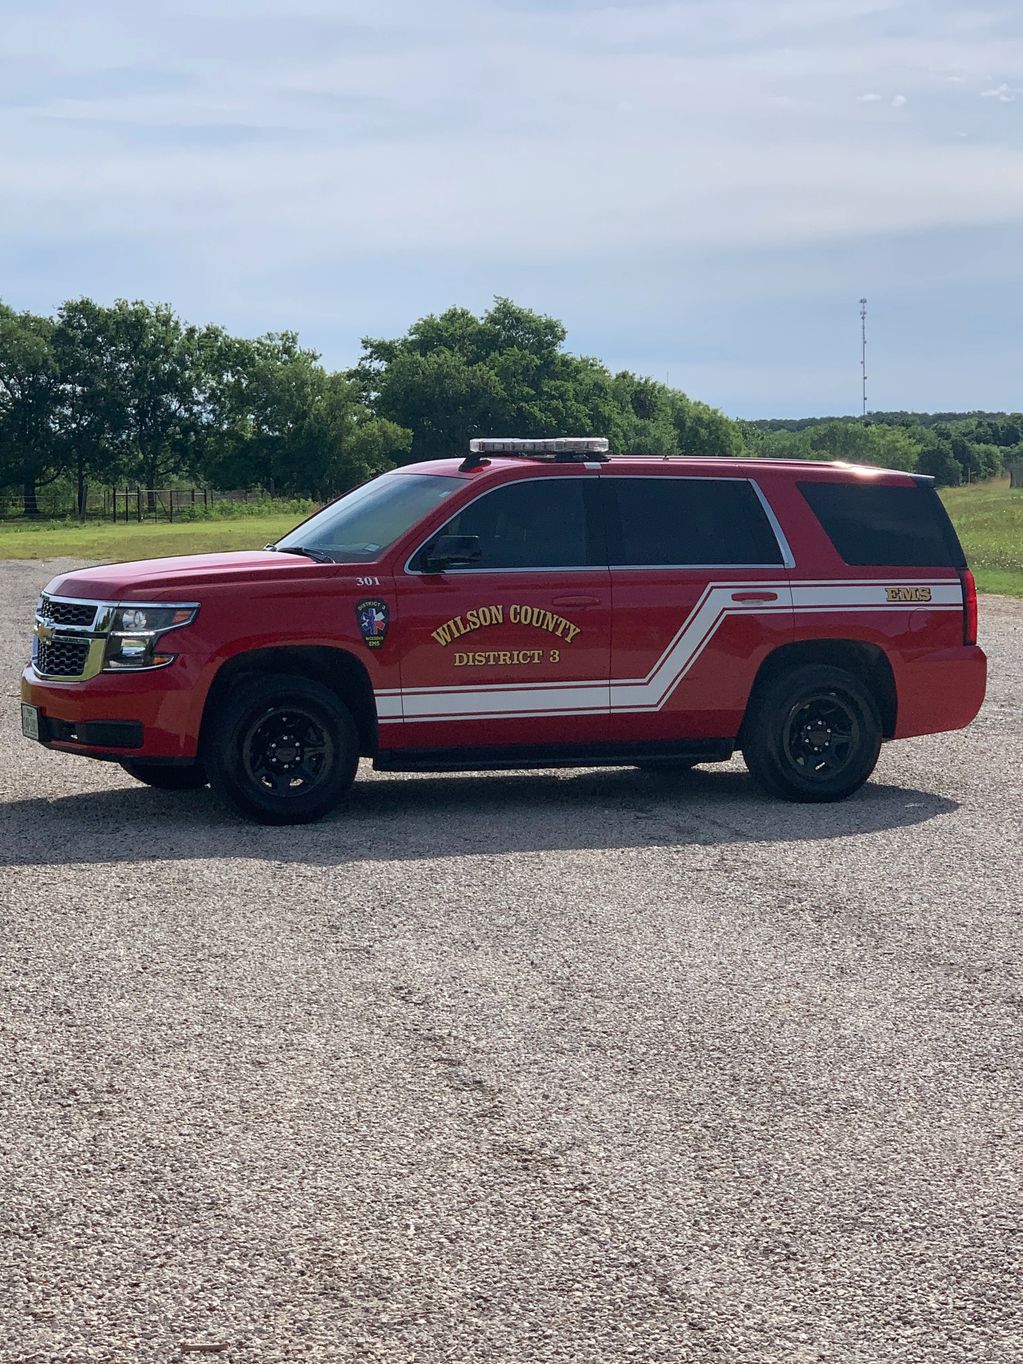 Unit 300
Chief 
2019 Chevy Tahoe